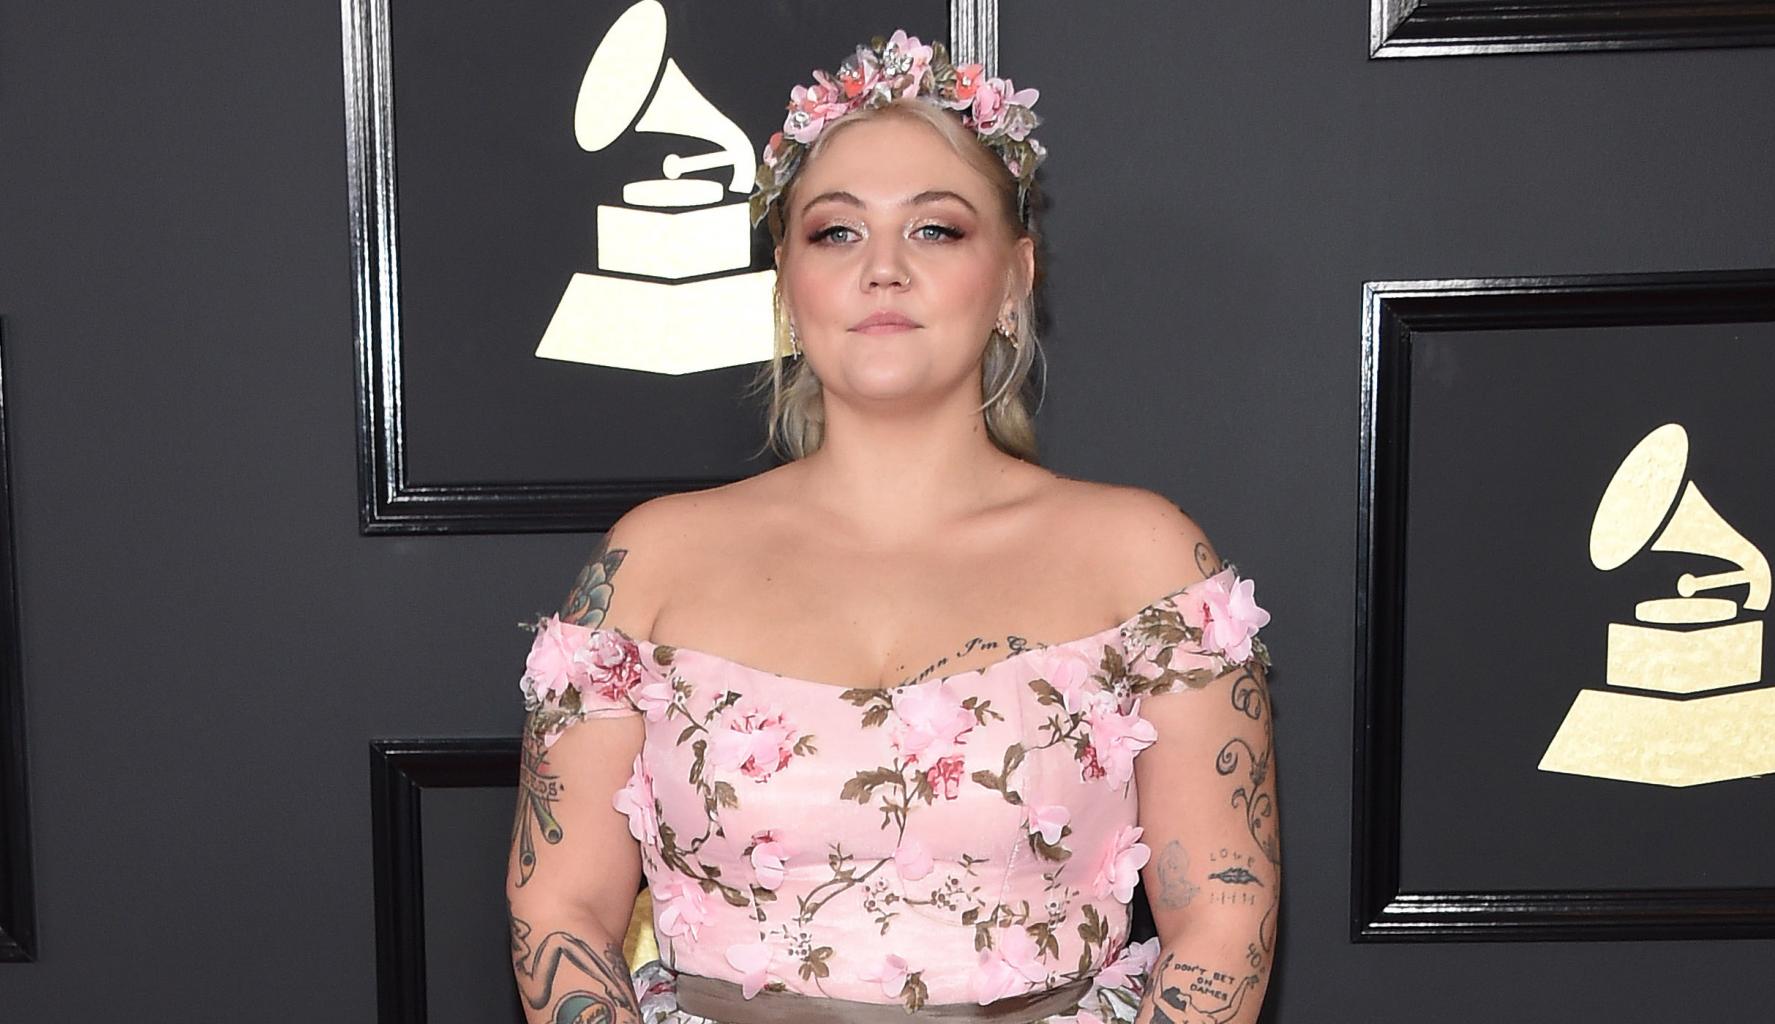 Elle King Didnâ€™t Get Married, Reveals She â€˜Skipped Out On My Weddingâ€™